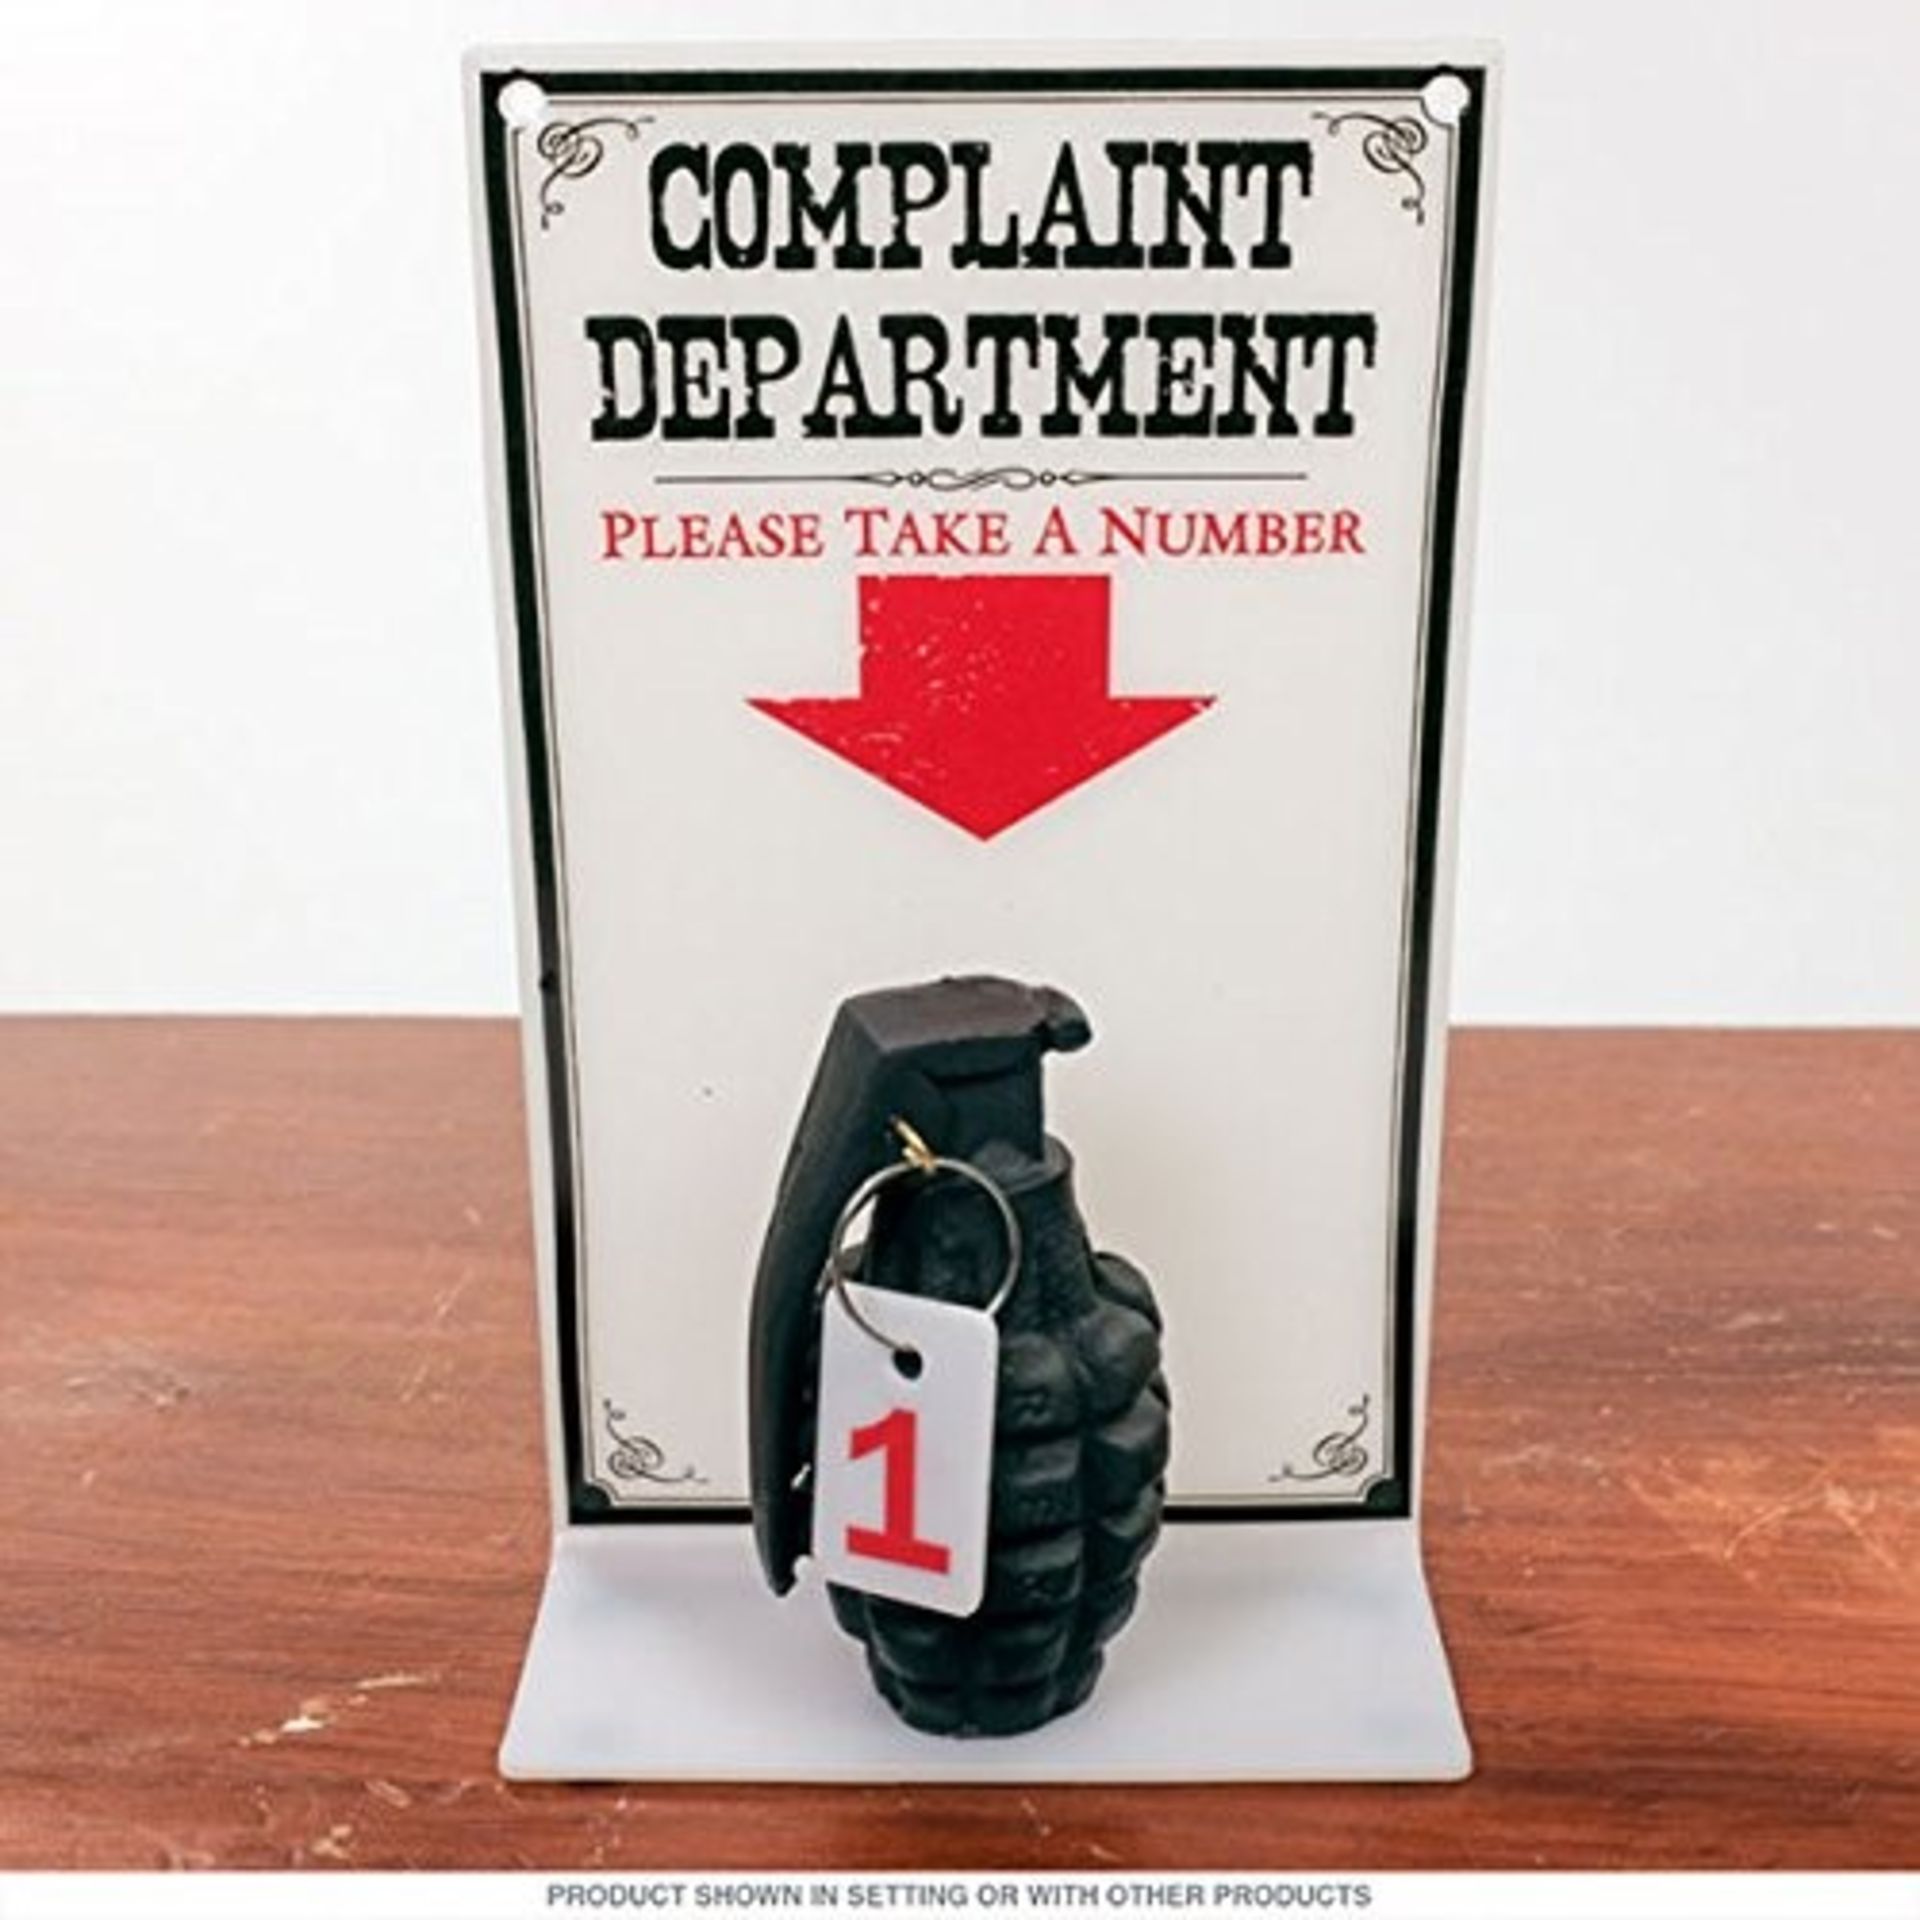 New Complaints Department Office Sign